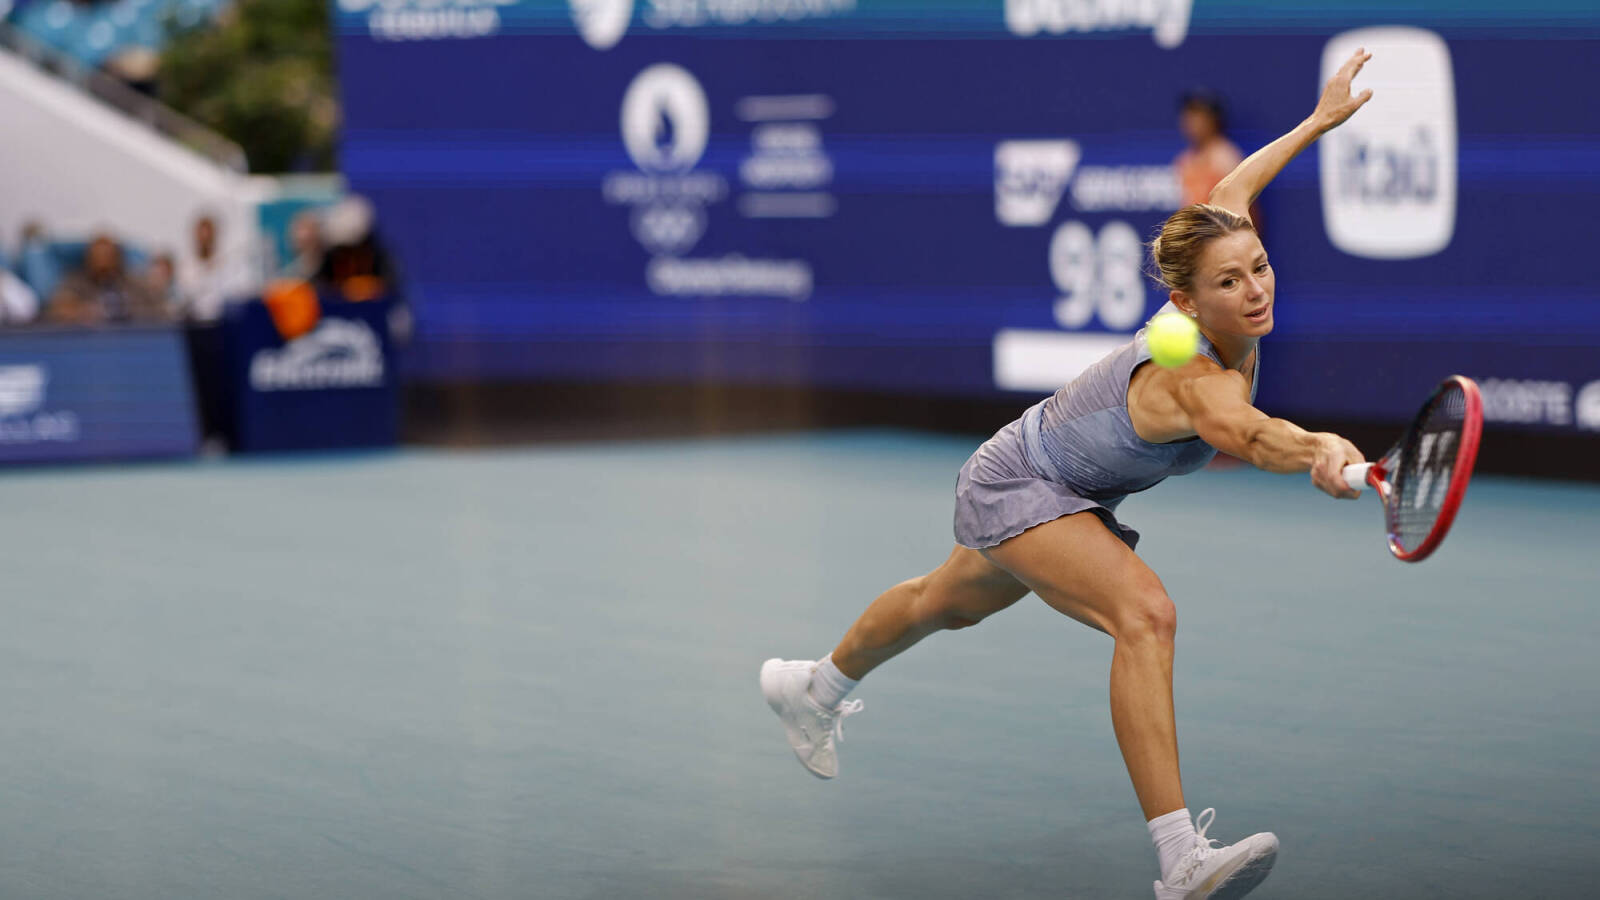 Shocking! Italy’s Camila Giorgi retires at the age of 32 without any official statement